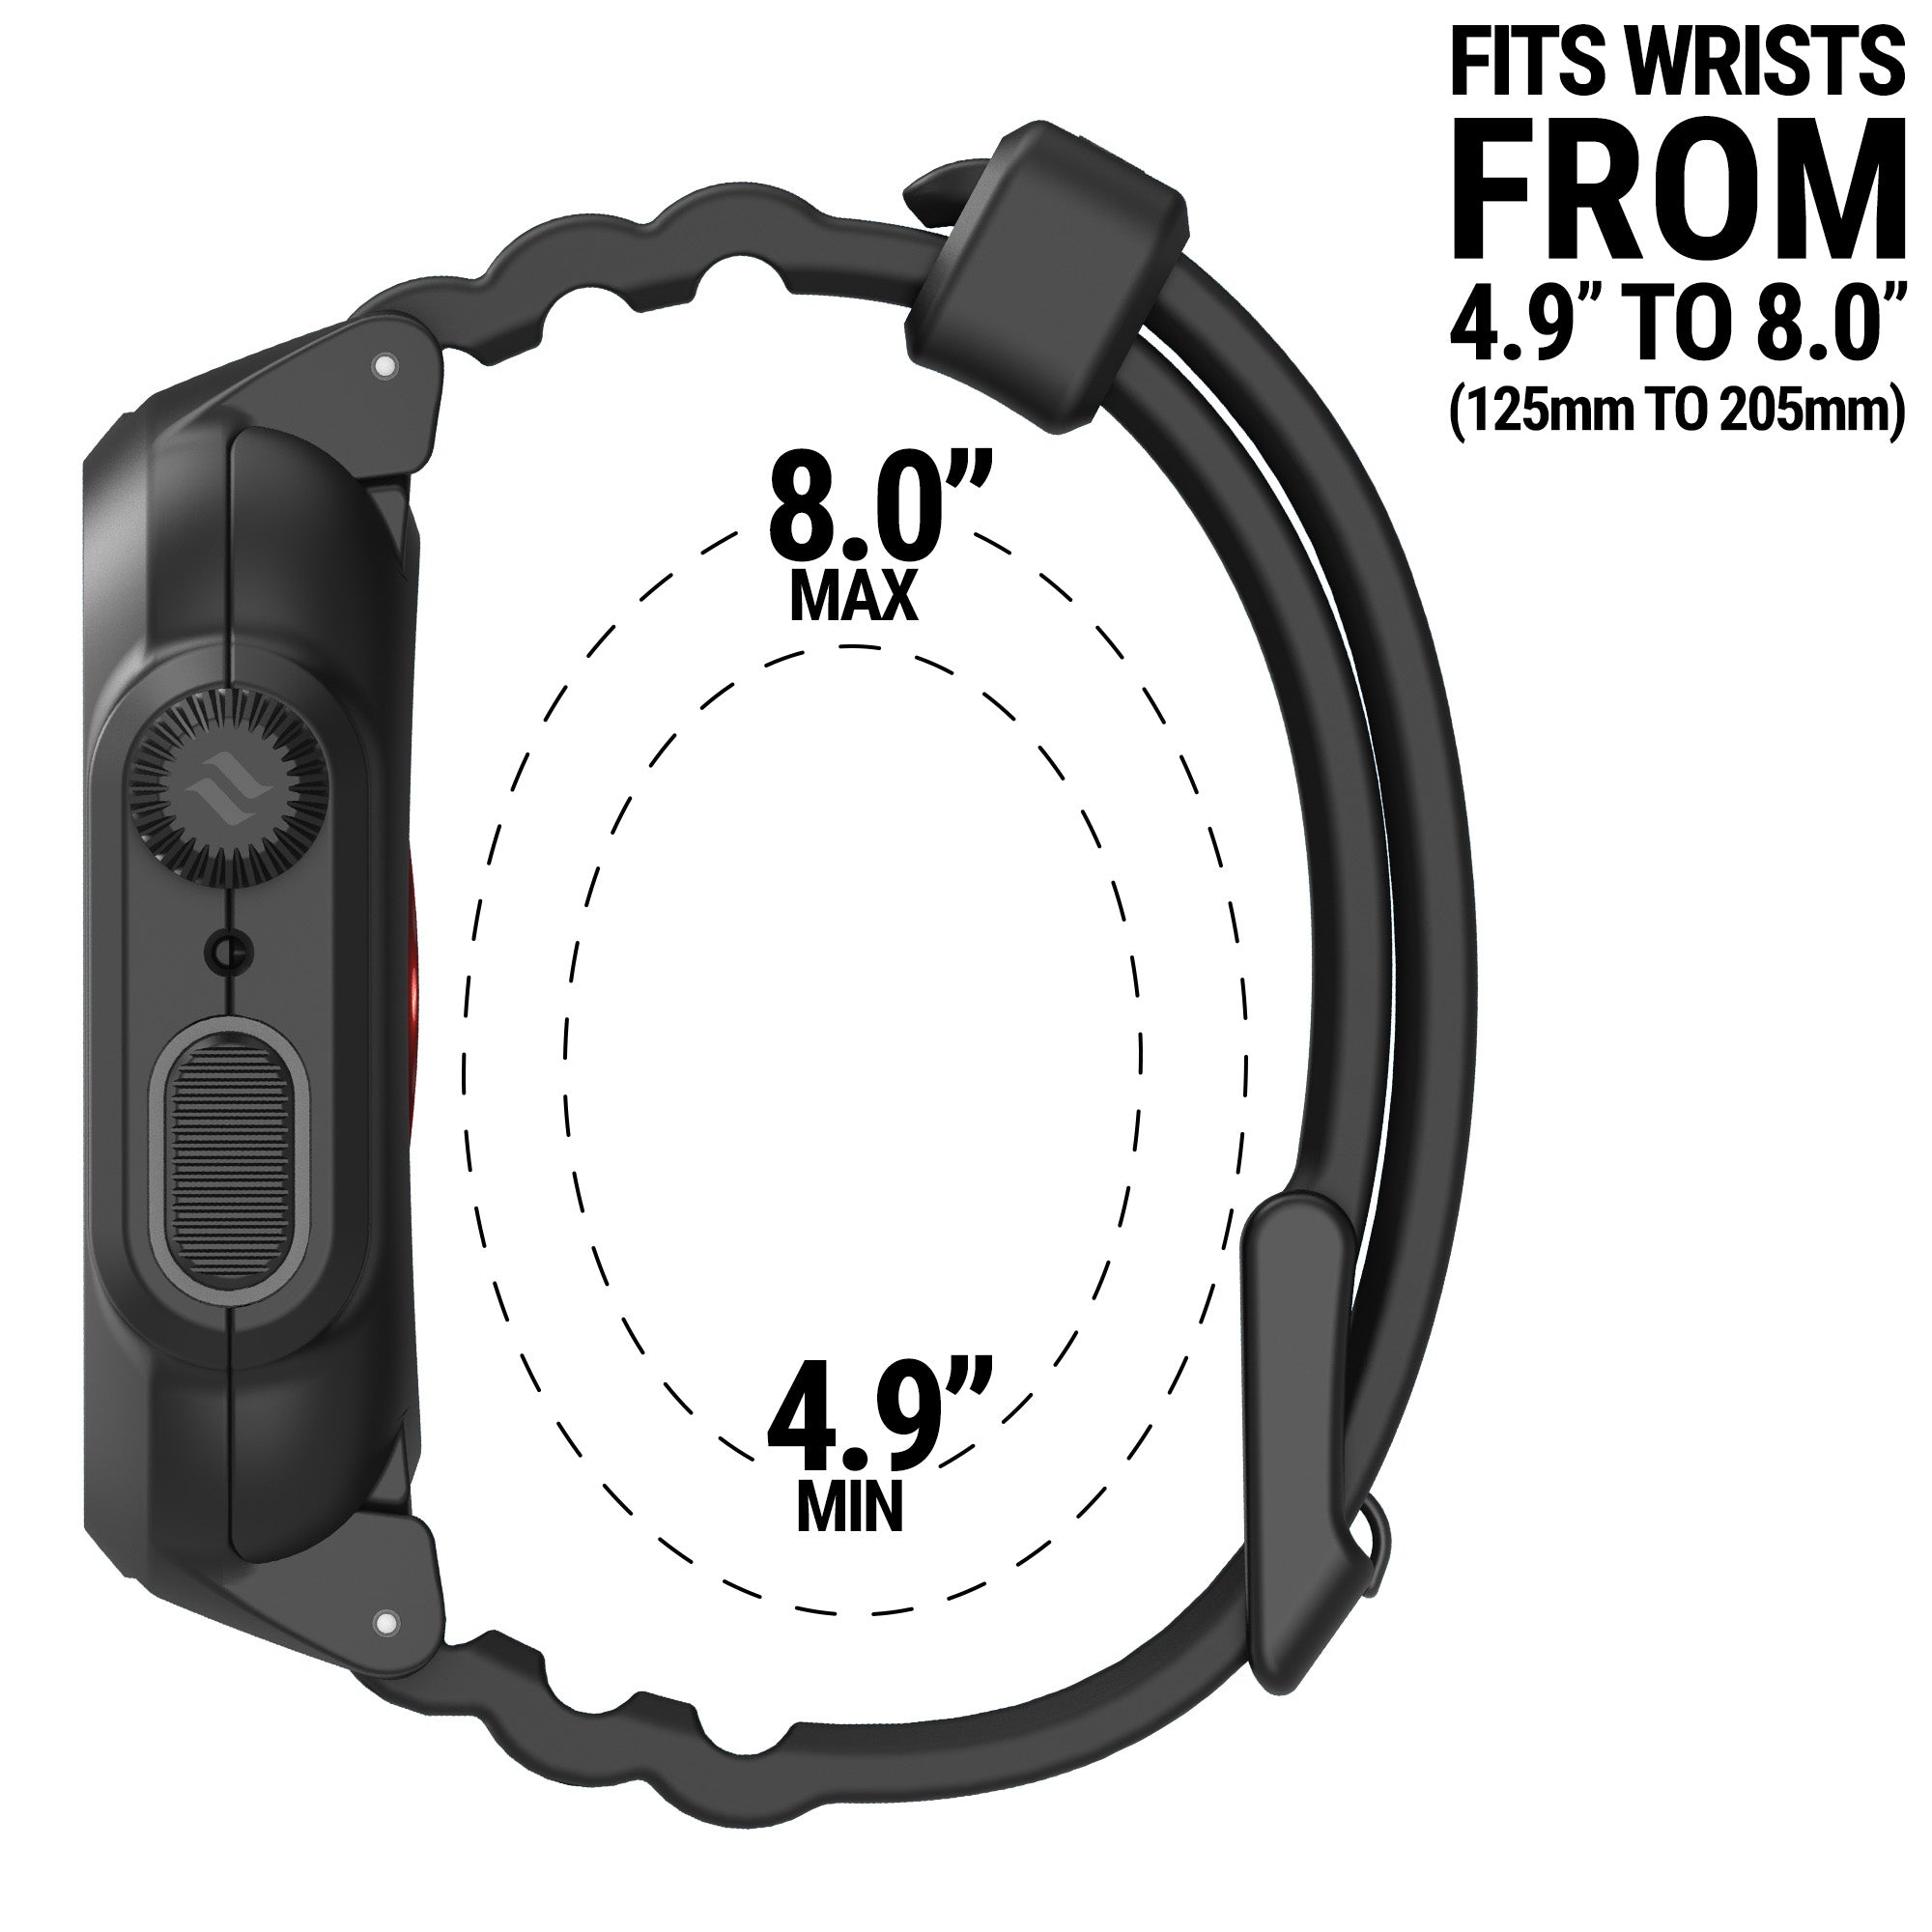 catalyst apple watch series 9 8 7 45mm total protection case band showing the side view of the catalyst case with the minimum and maximum sizes of the band text reads fits wrists from 4.9" to 8.0"(125mm to 205mm)